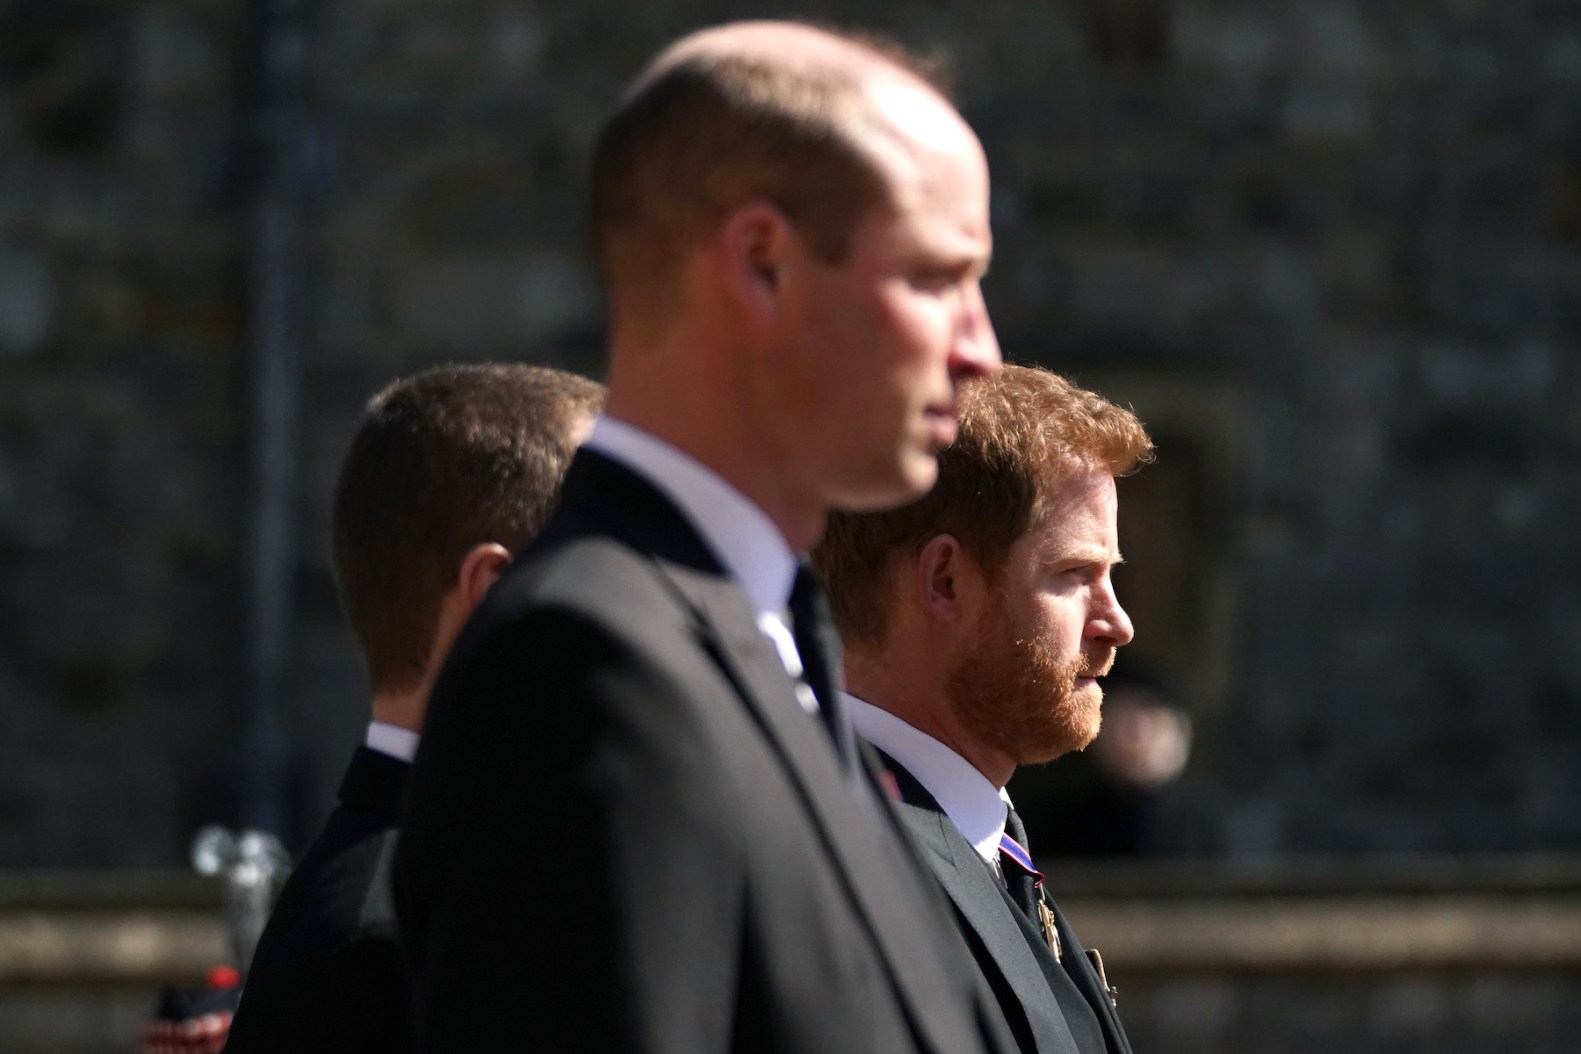 Prince Harry 'close to exploding with anger and bitterness’ during Africa trip -